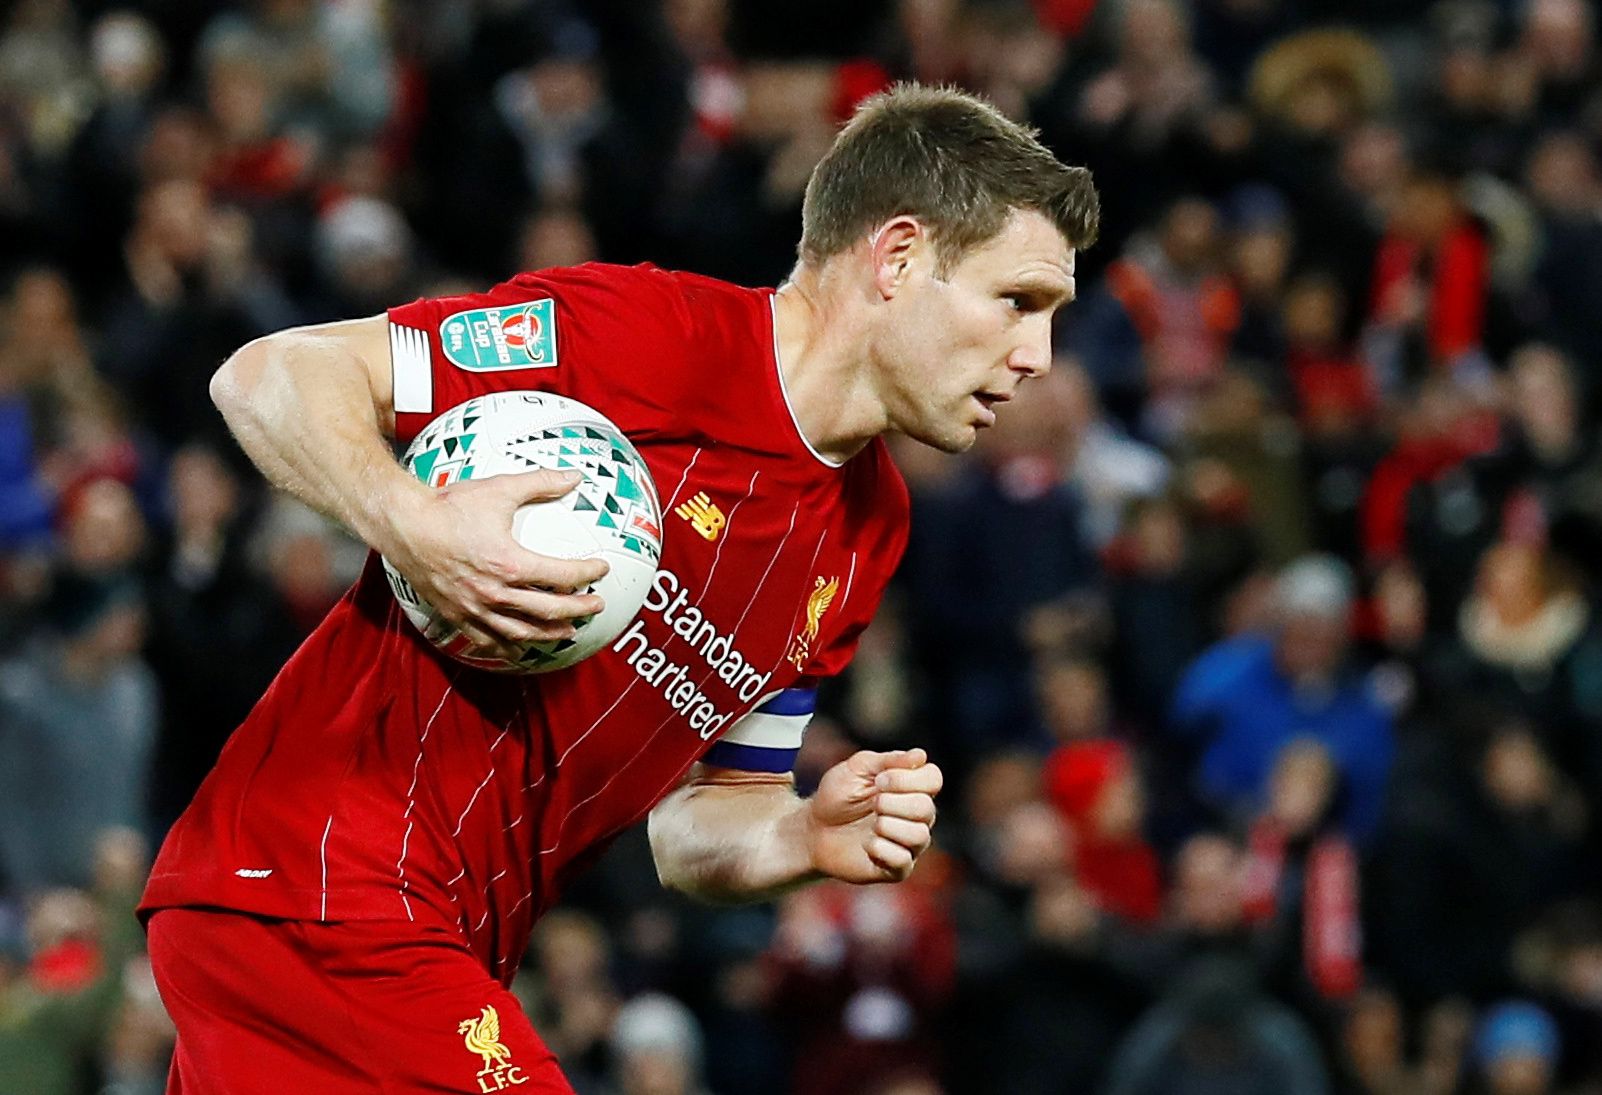 Soccer Football - Carabao Cup - Fourth Round - Liverpool v Arsenal - Anfield, Liverpool, Britain - October 30, 2019  Liverpool's James Milner celebrates scoring their second goal   Action Images via Reuters/Jason Cairnduff  EDITORIAL USE ONLY. No use with unauthorized audio, video, data, fixture lists, club/league logos or 